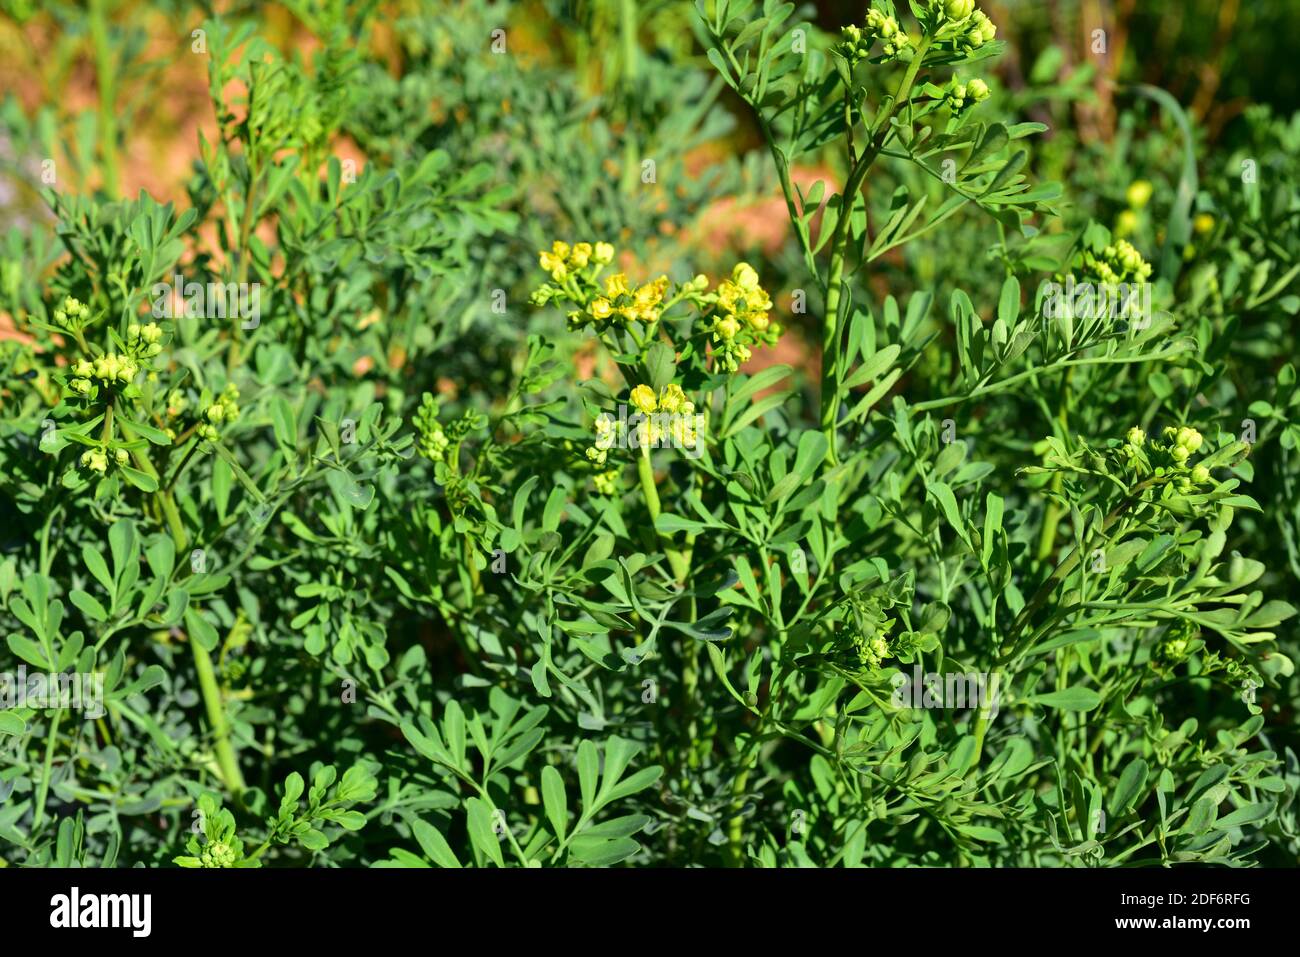 Common rue (Ruta graveolens) is a medicinal and toxic perennial herb native to Balkan Peninsula. Flowers and leaves detail. Stock Photo